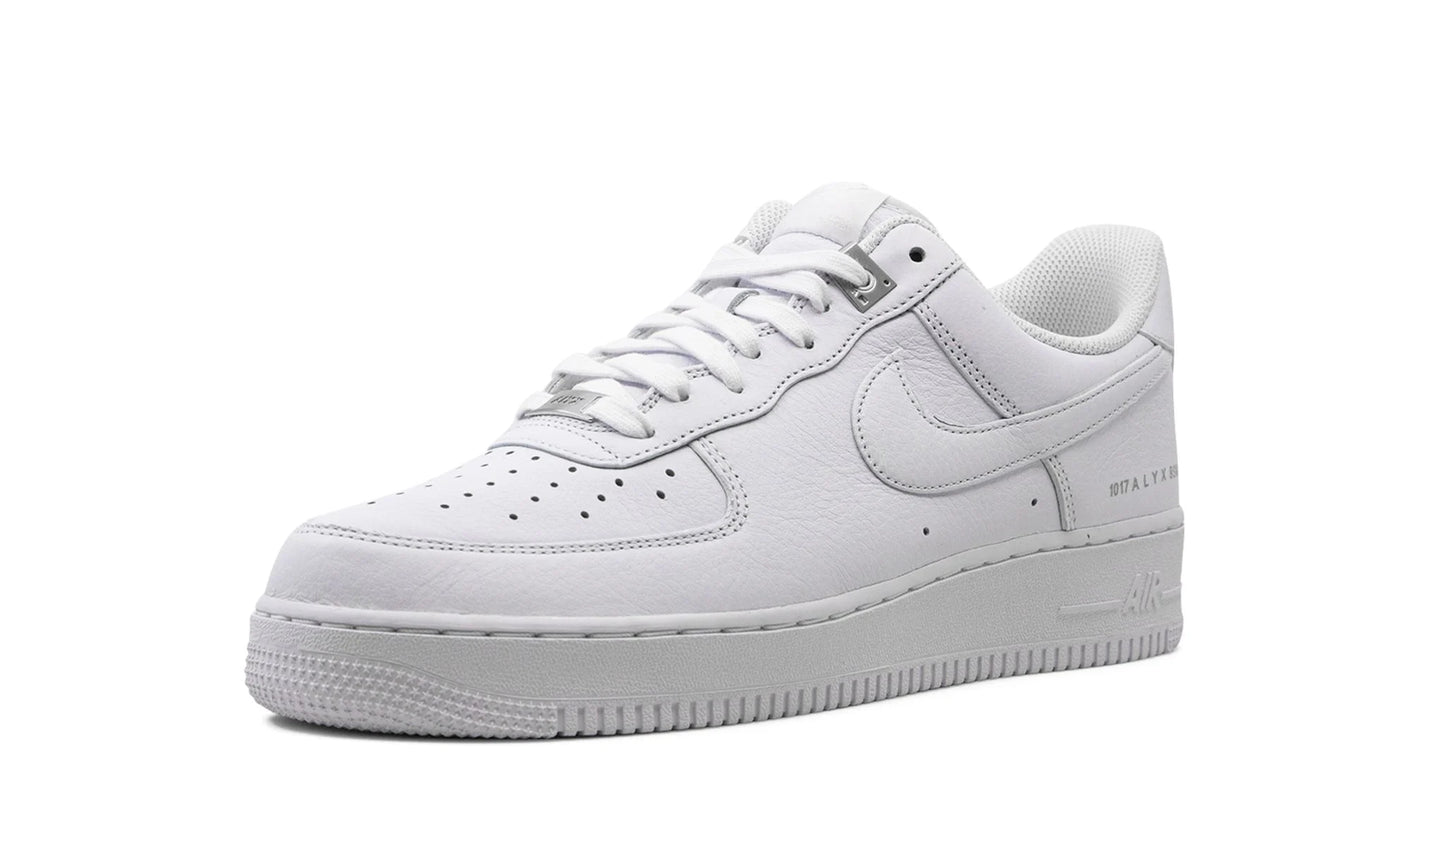 Nike Air Force 1 Low 1017 ALYX 9SM White